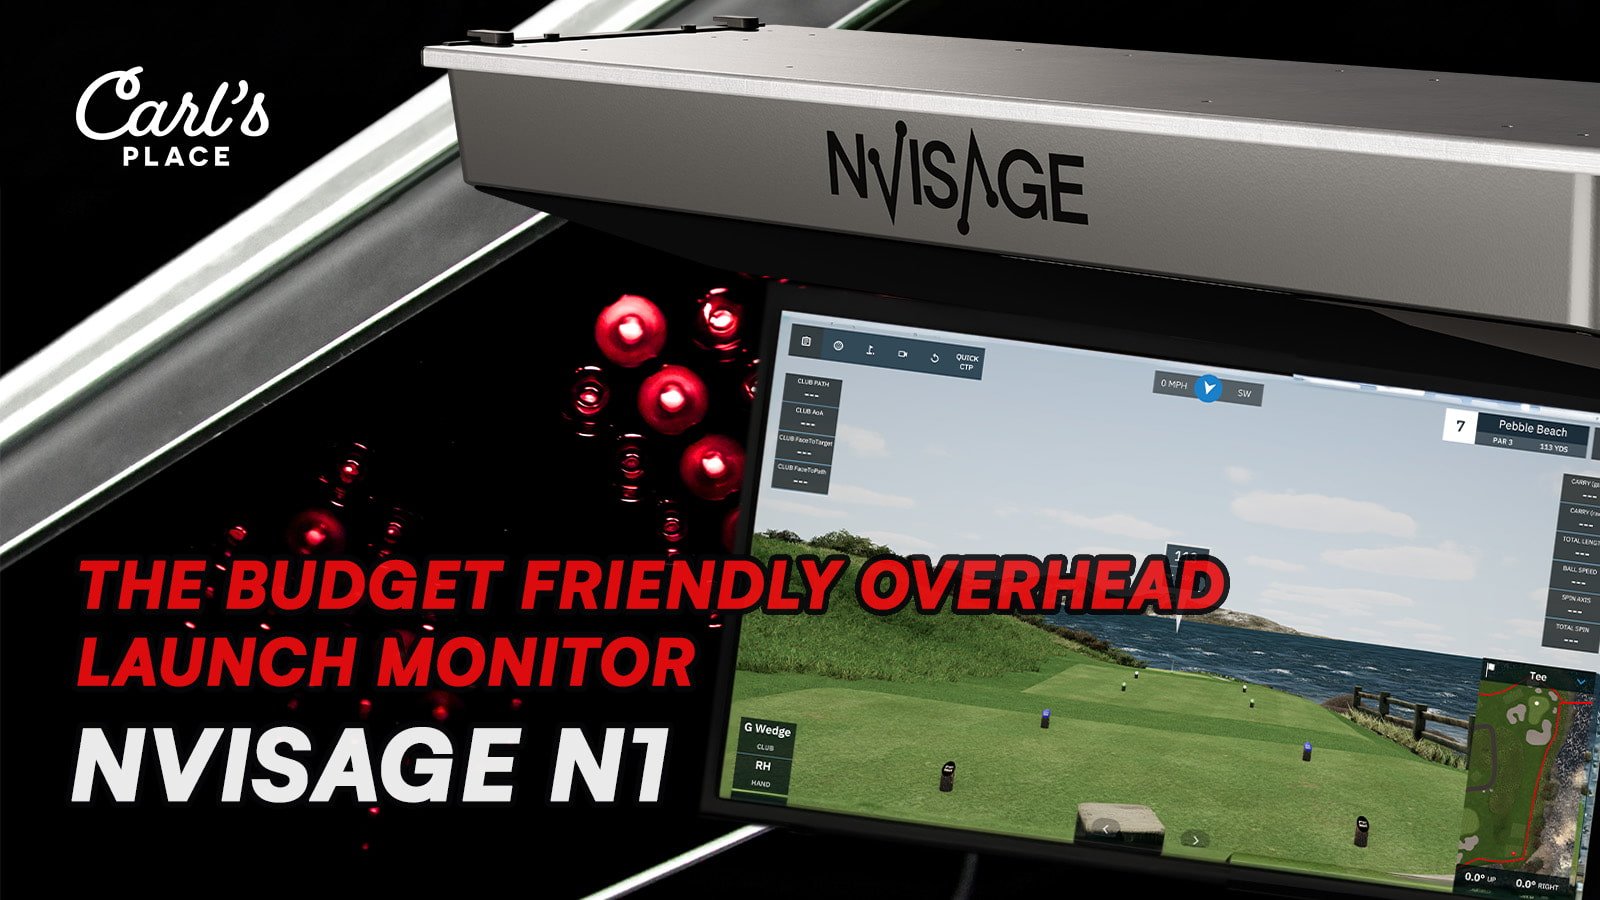 NVISAGE N1 - budget friendly overhead launch monitor